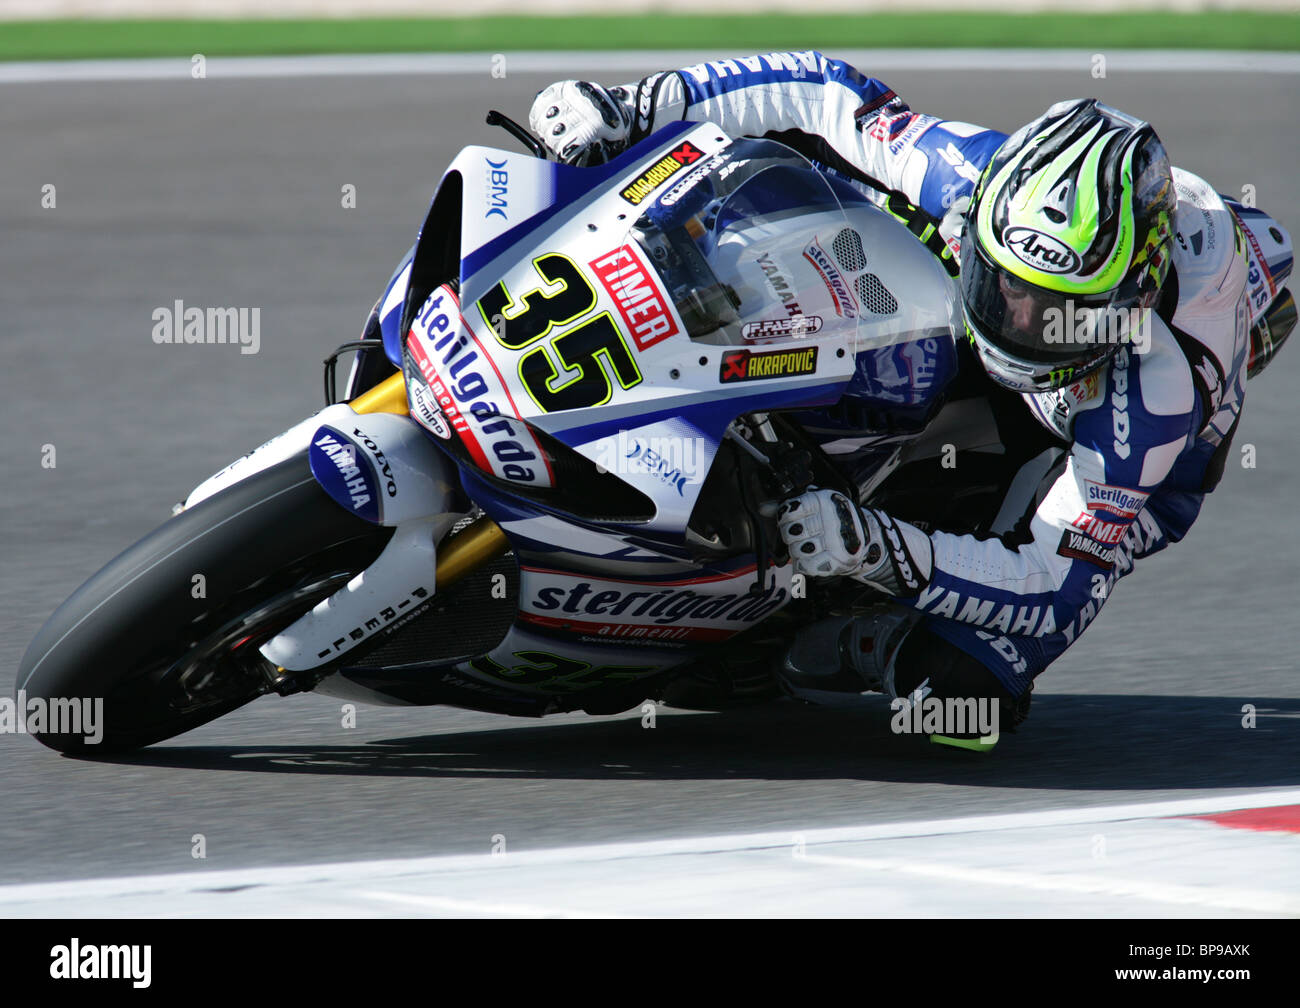 PORTIMAO, PORTUGAL - MARCH 27: Cal Crutchlow, 1st place Superpole 3 on Superbikes, Algarve, Portimao on March 27, 2010.  Stock Photo